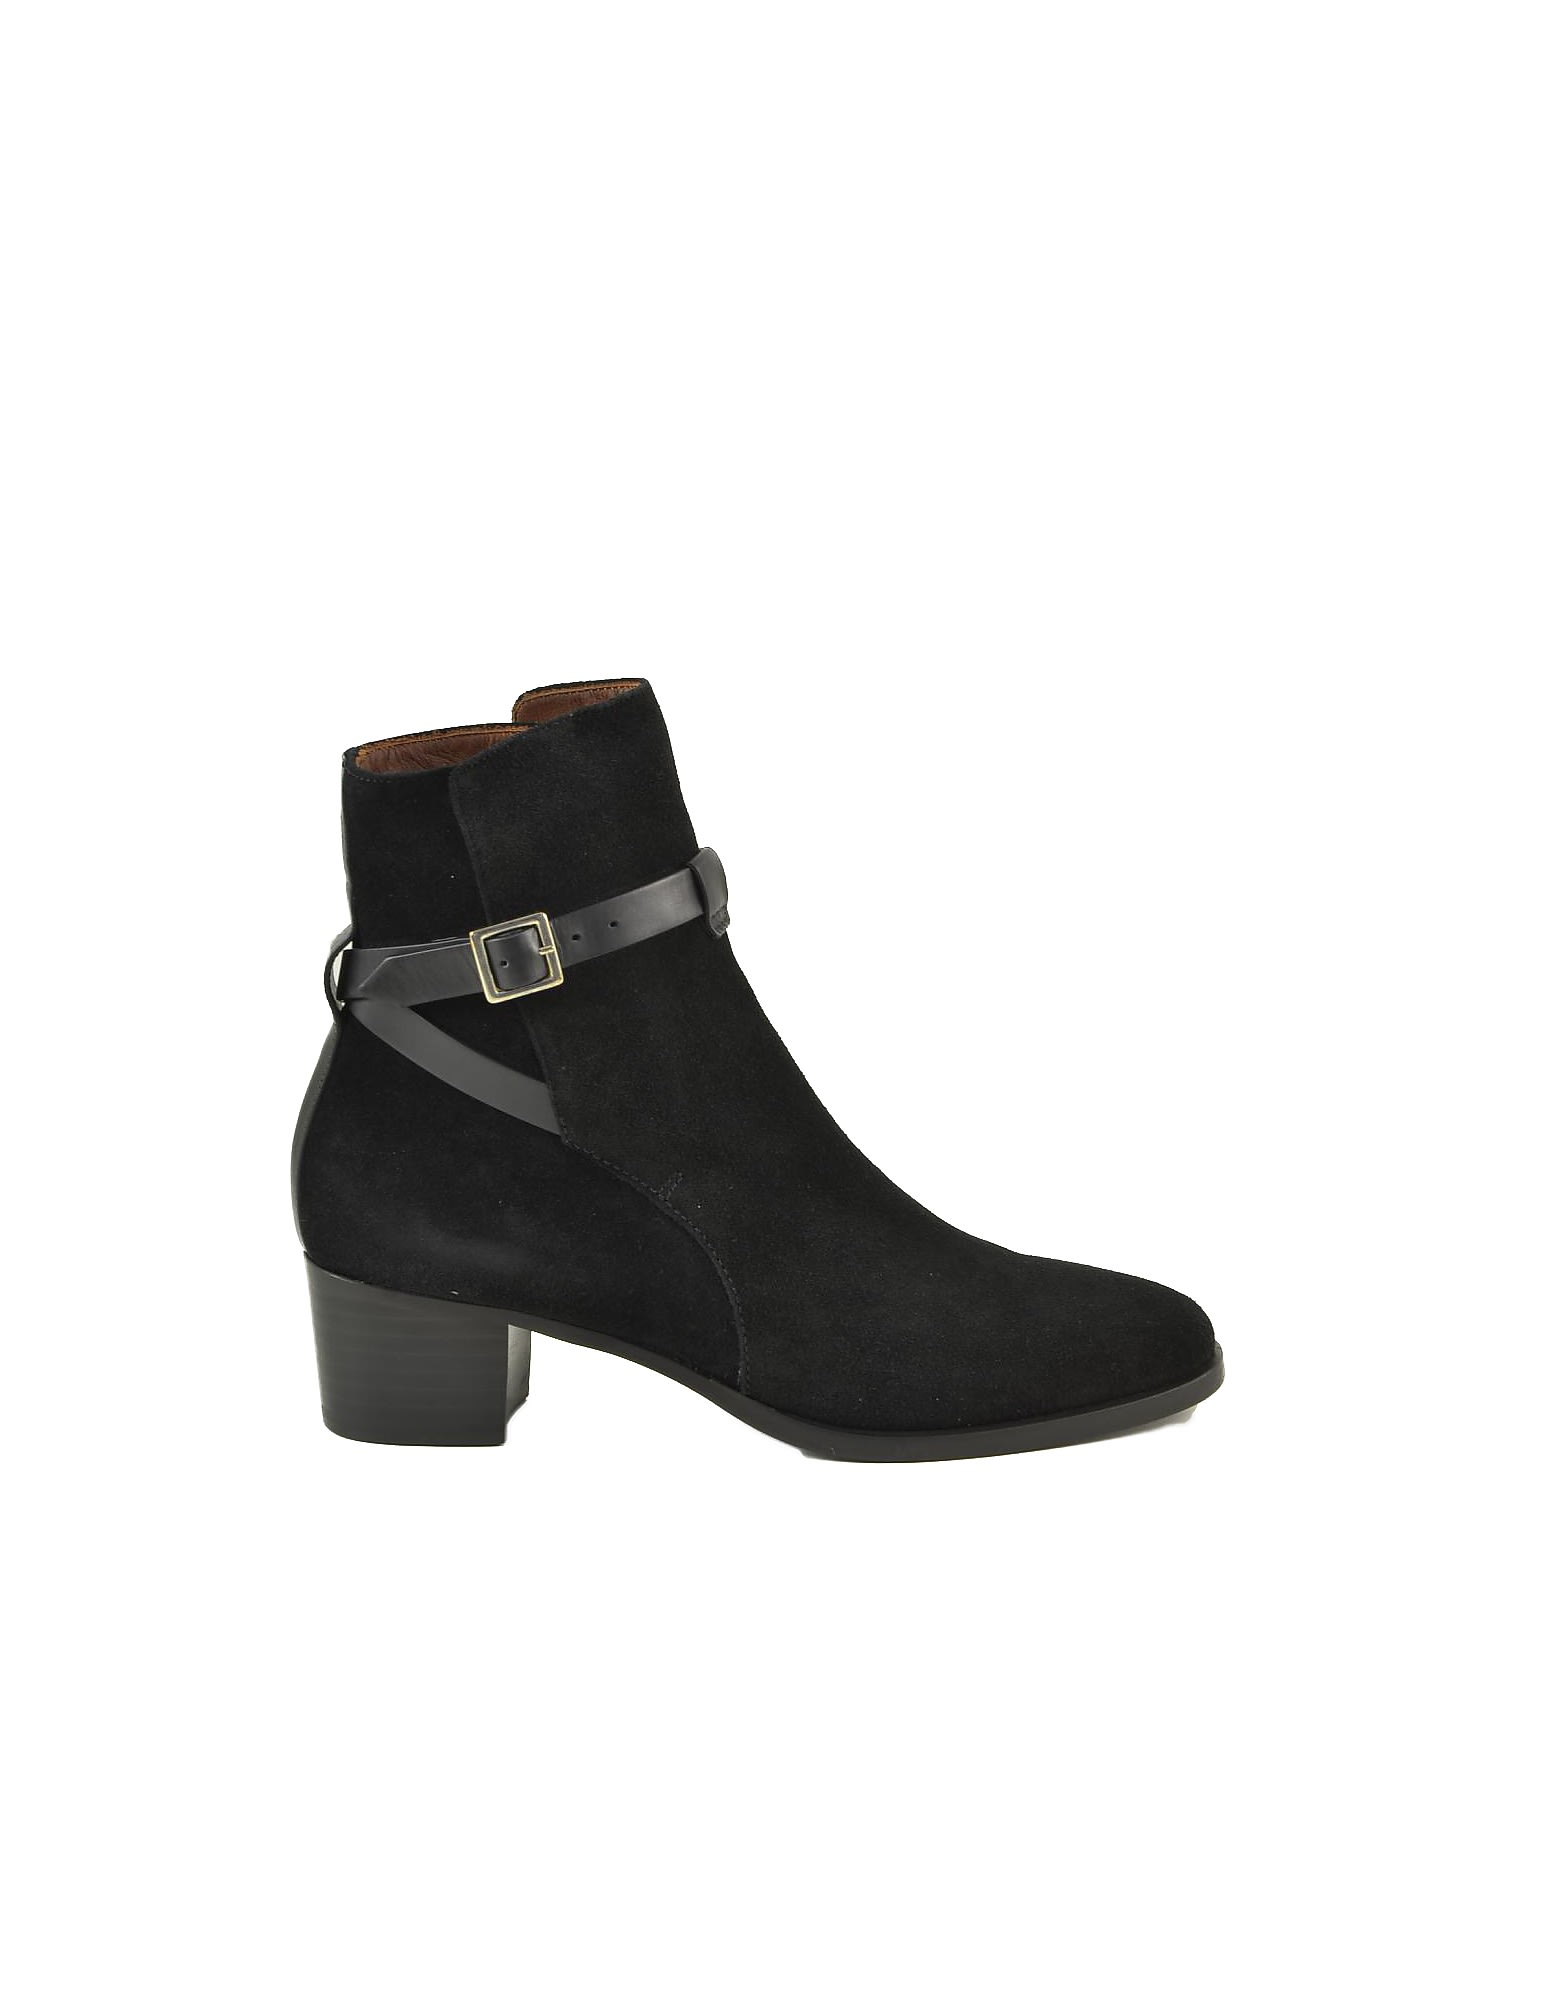 Lautre Chose Black Suede And Leather Booties